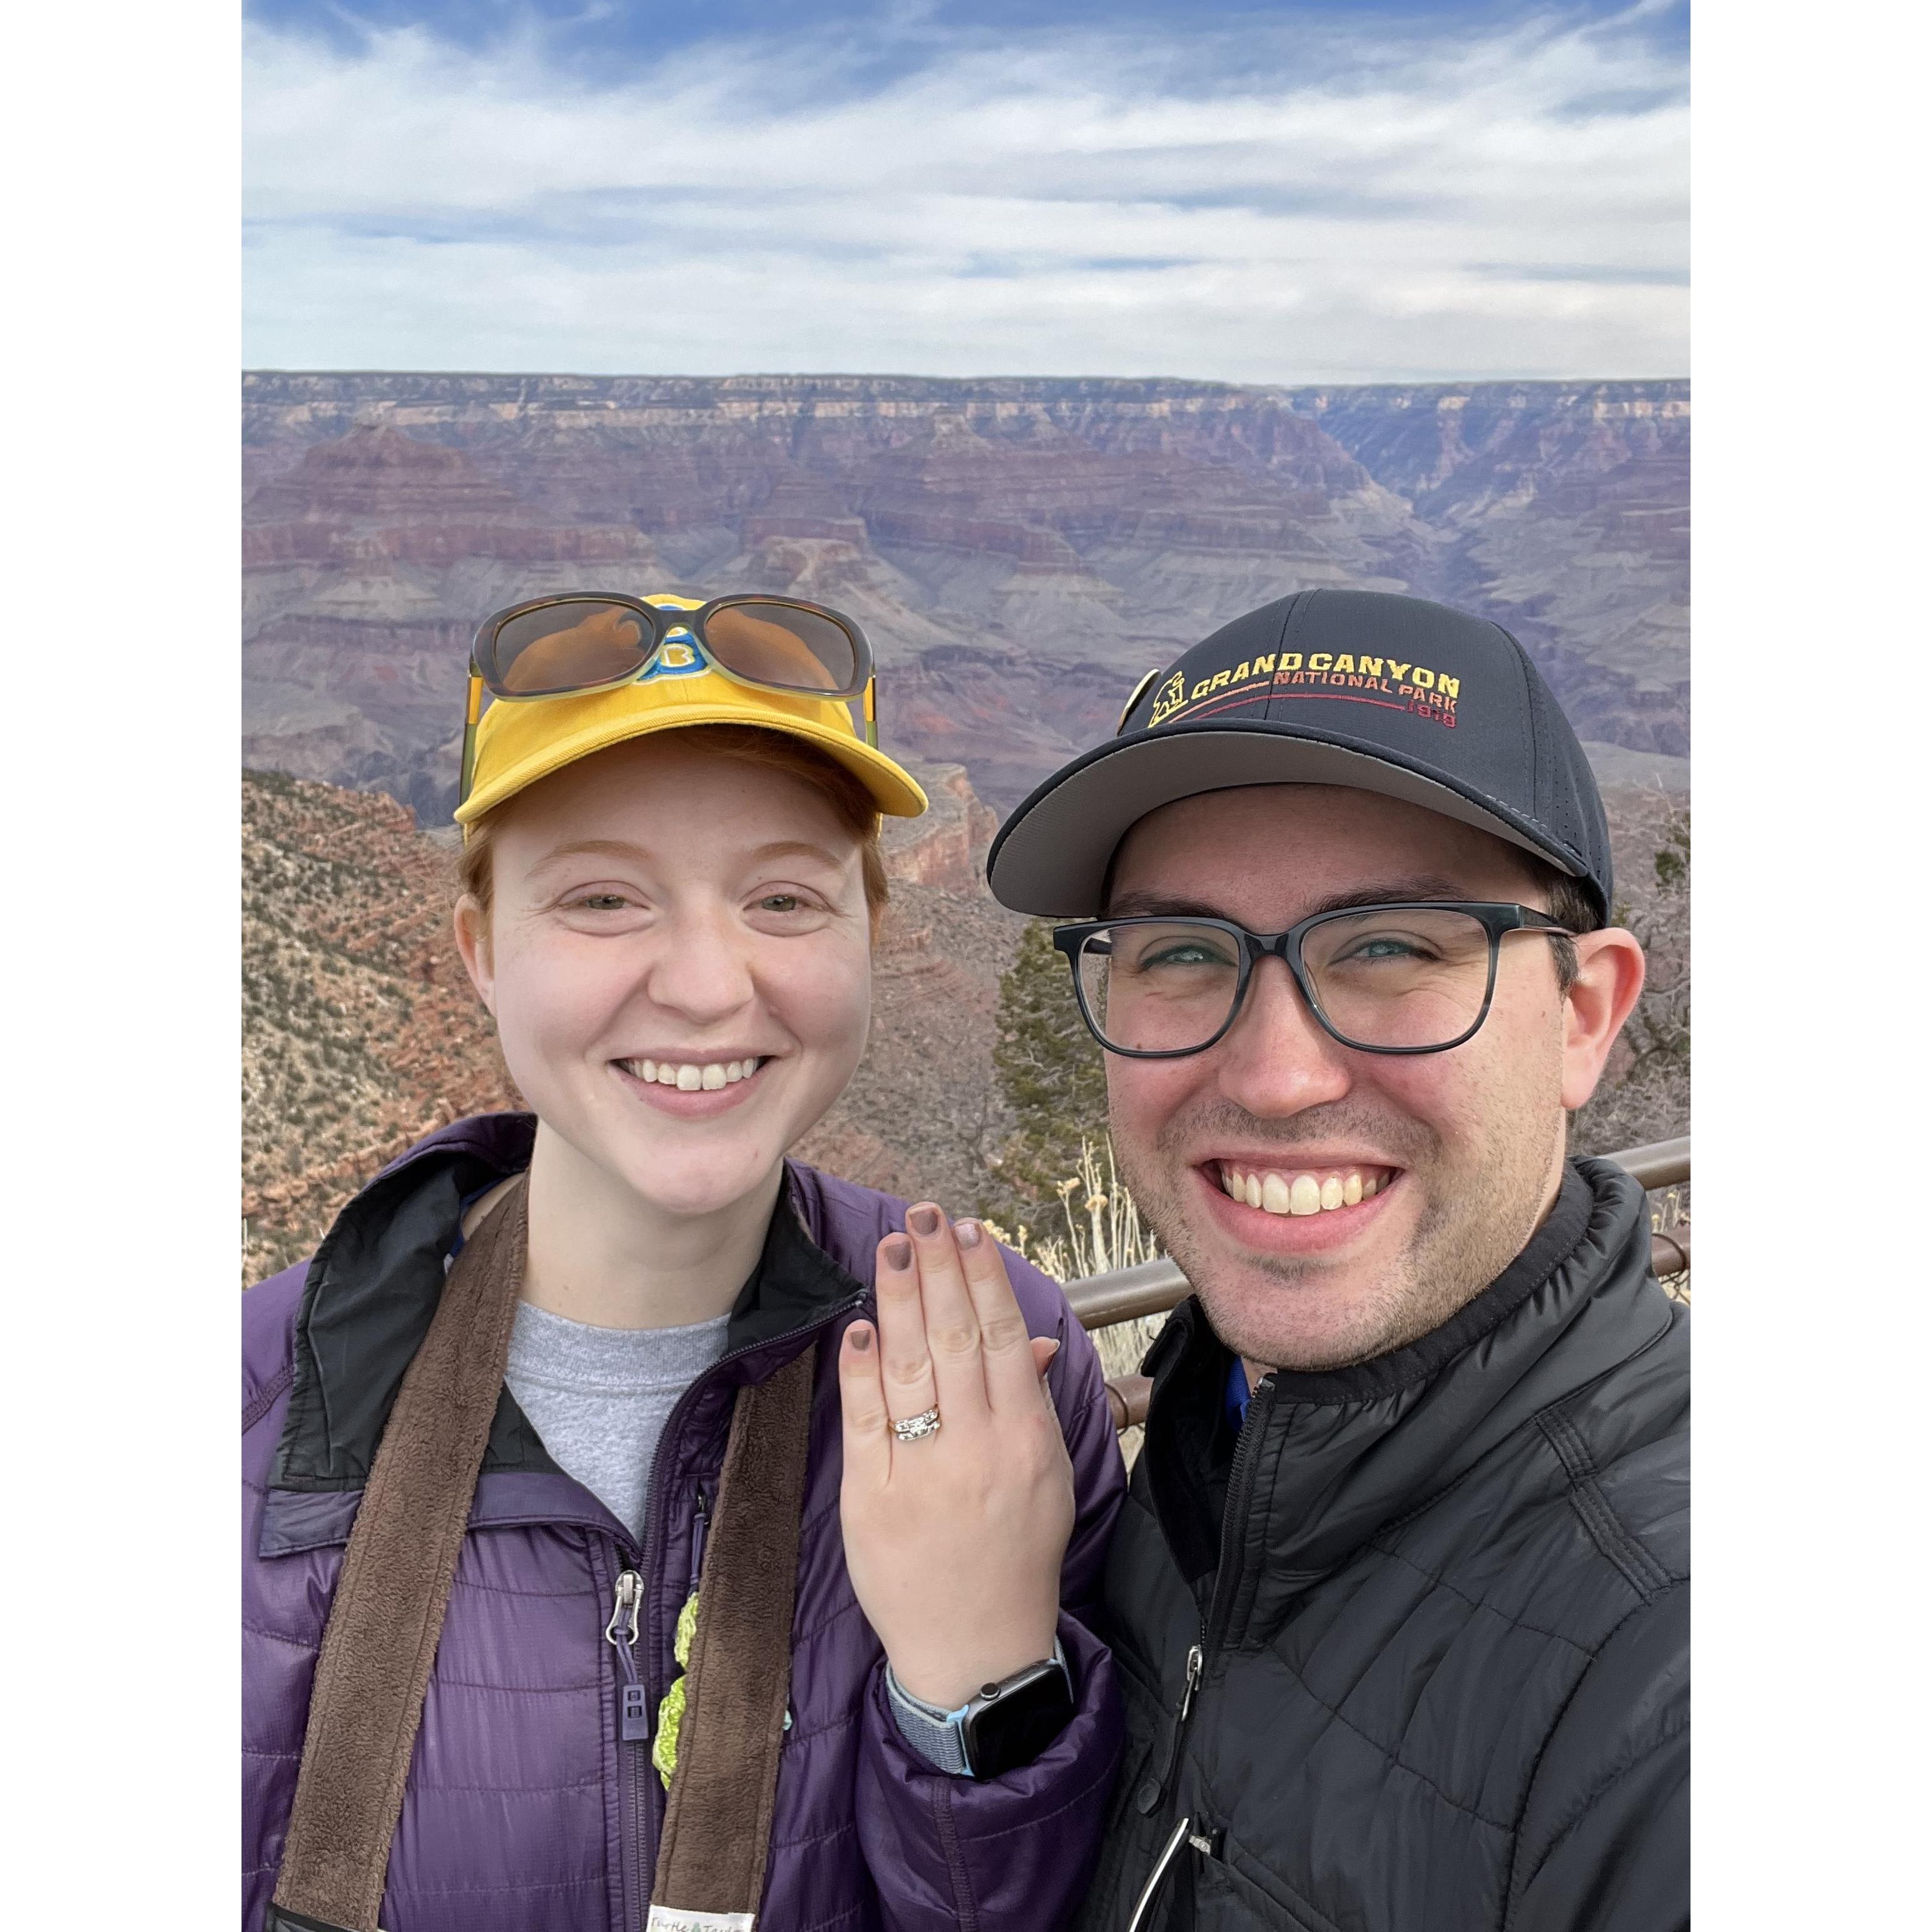 She Said Yes! Engagement day in The Grand Canyon - March 3, 2022